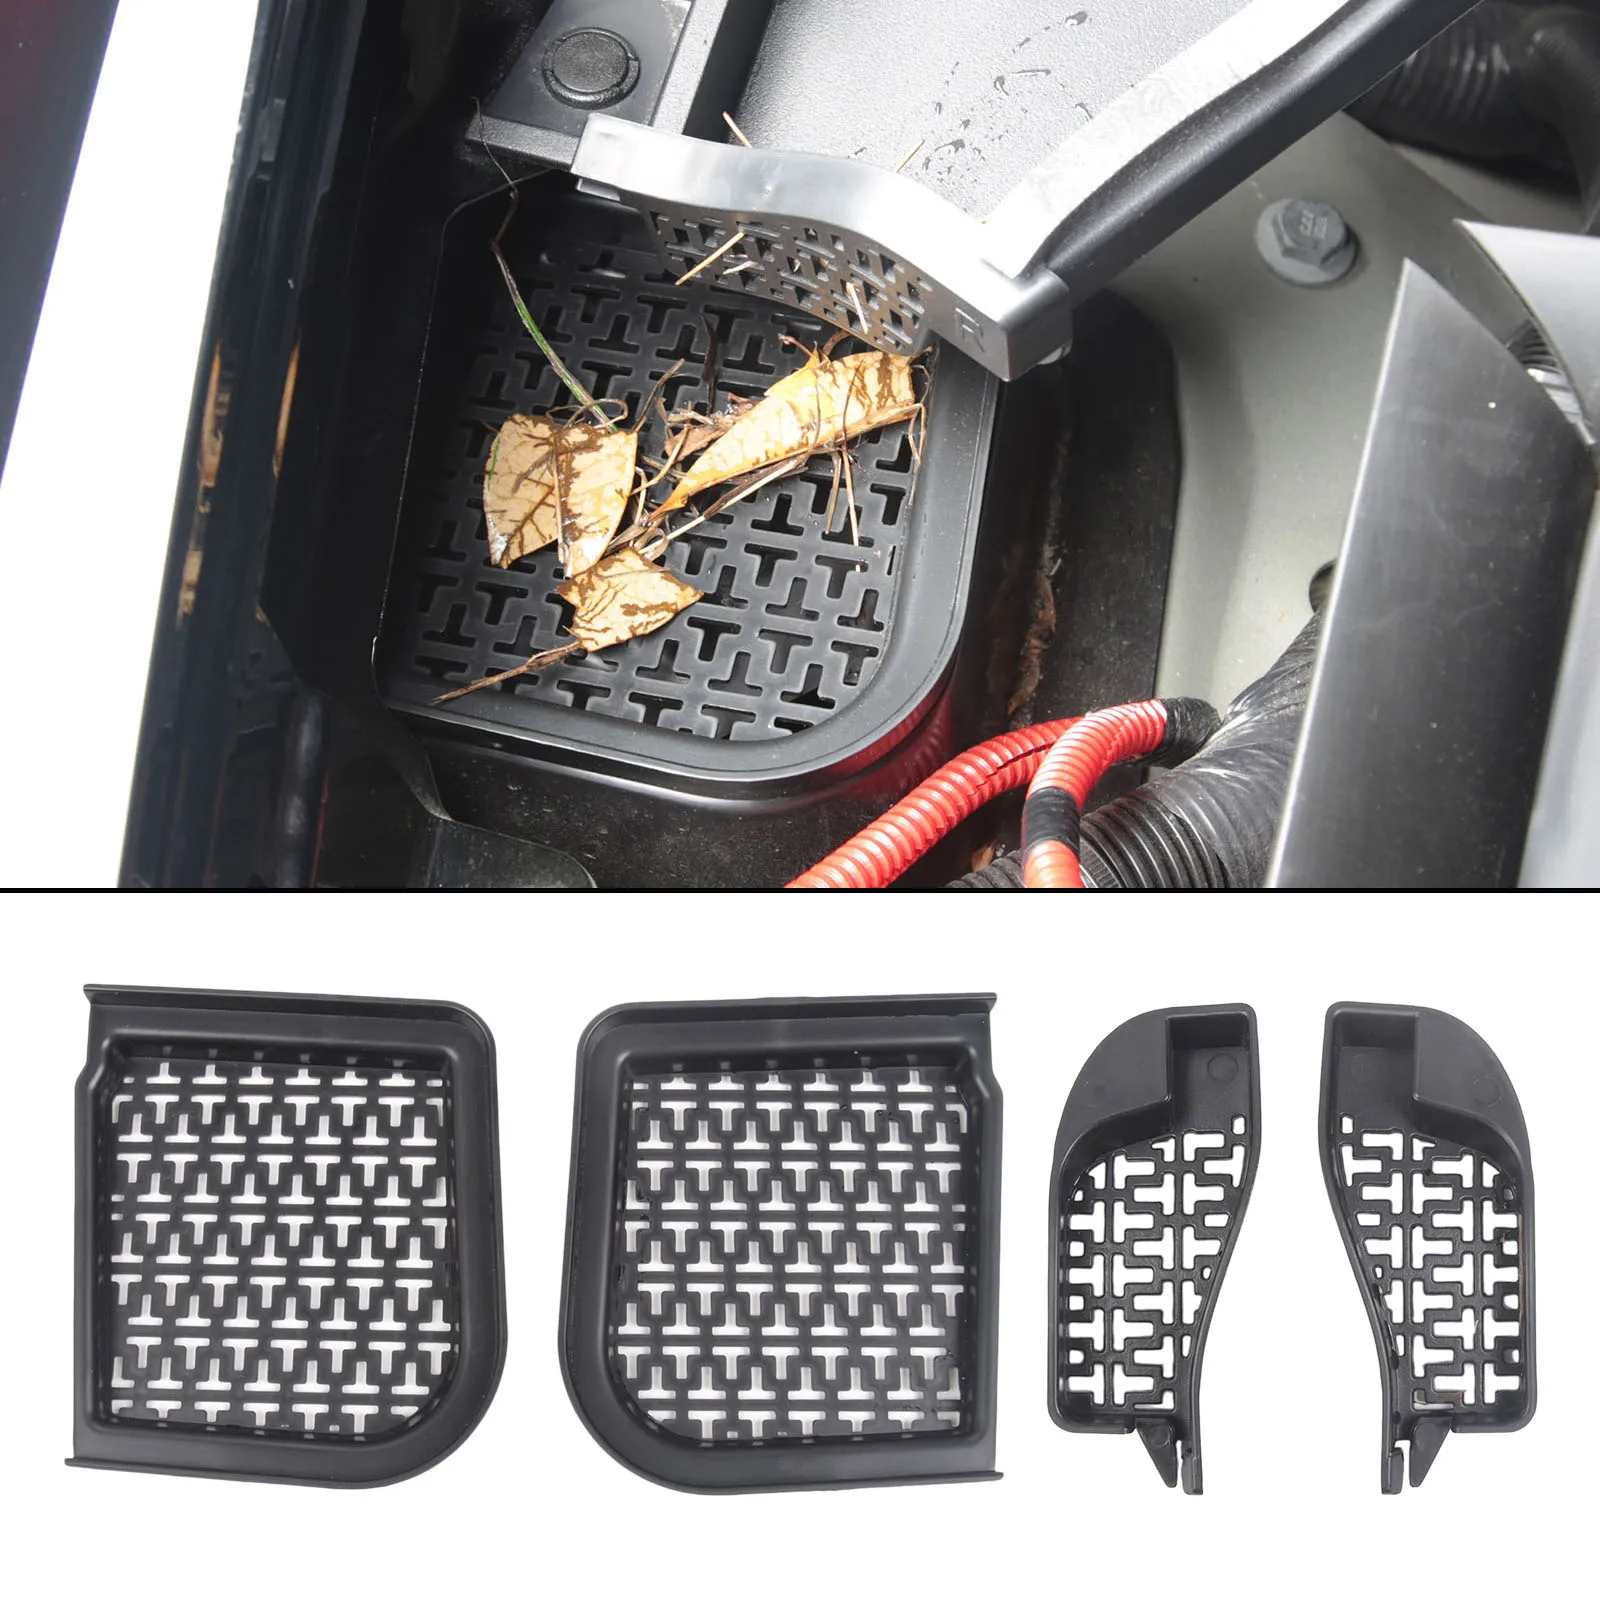 Filter Element Screen Filter Protector Protection Cover Filter Screen for Tesla Model Y ABS Plastic Prevent clogging